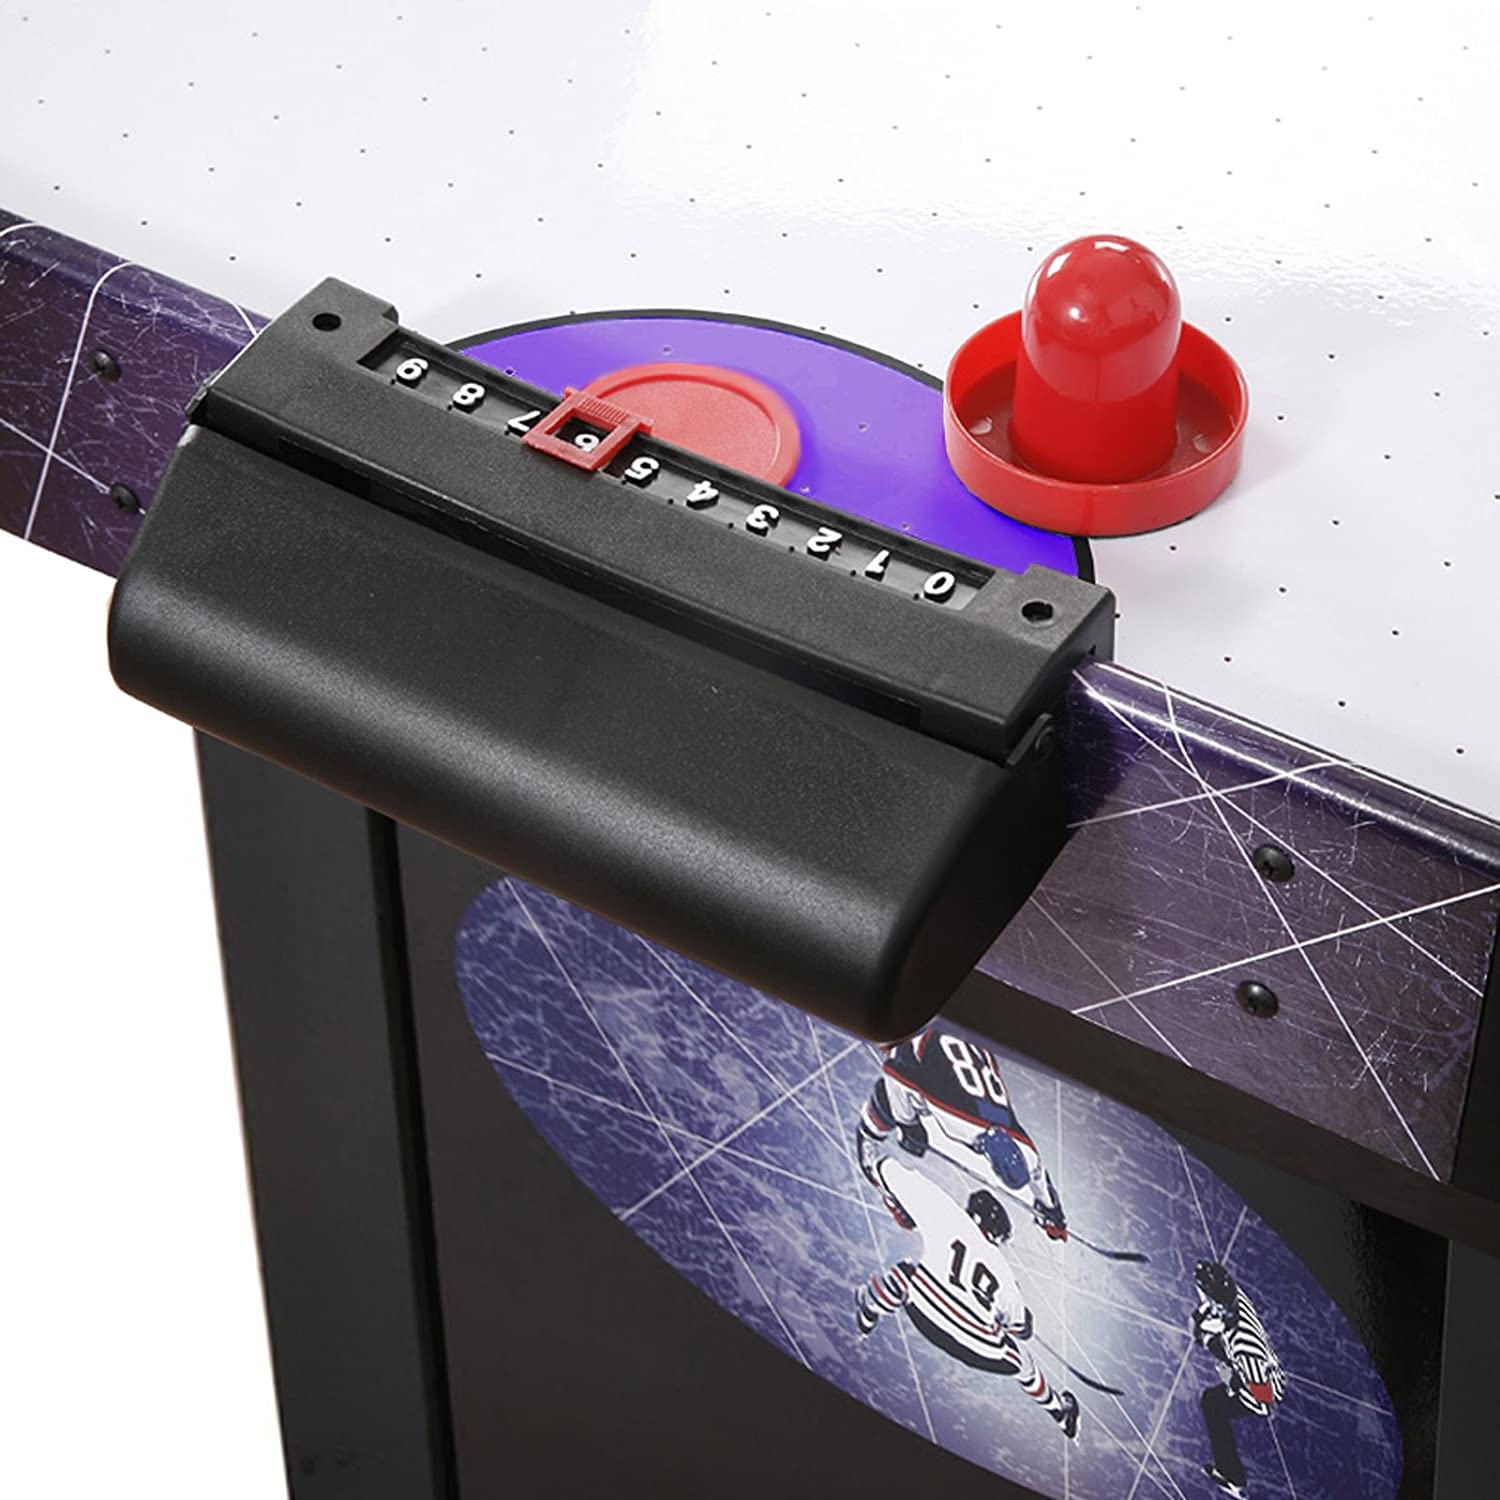 Hathaway Hat Trick 4-Ft Air Hockey Table for Kids and Adults with Electronic and Manual Scoring, Leg Levelers